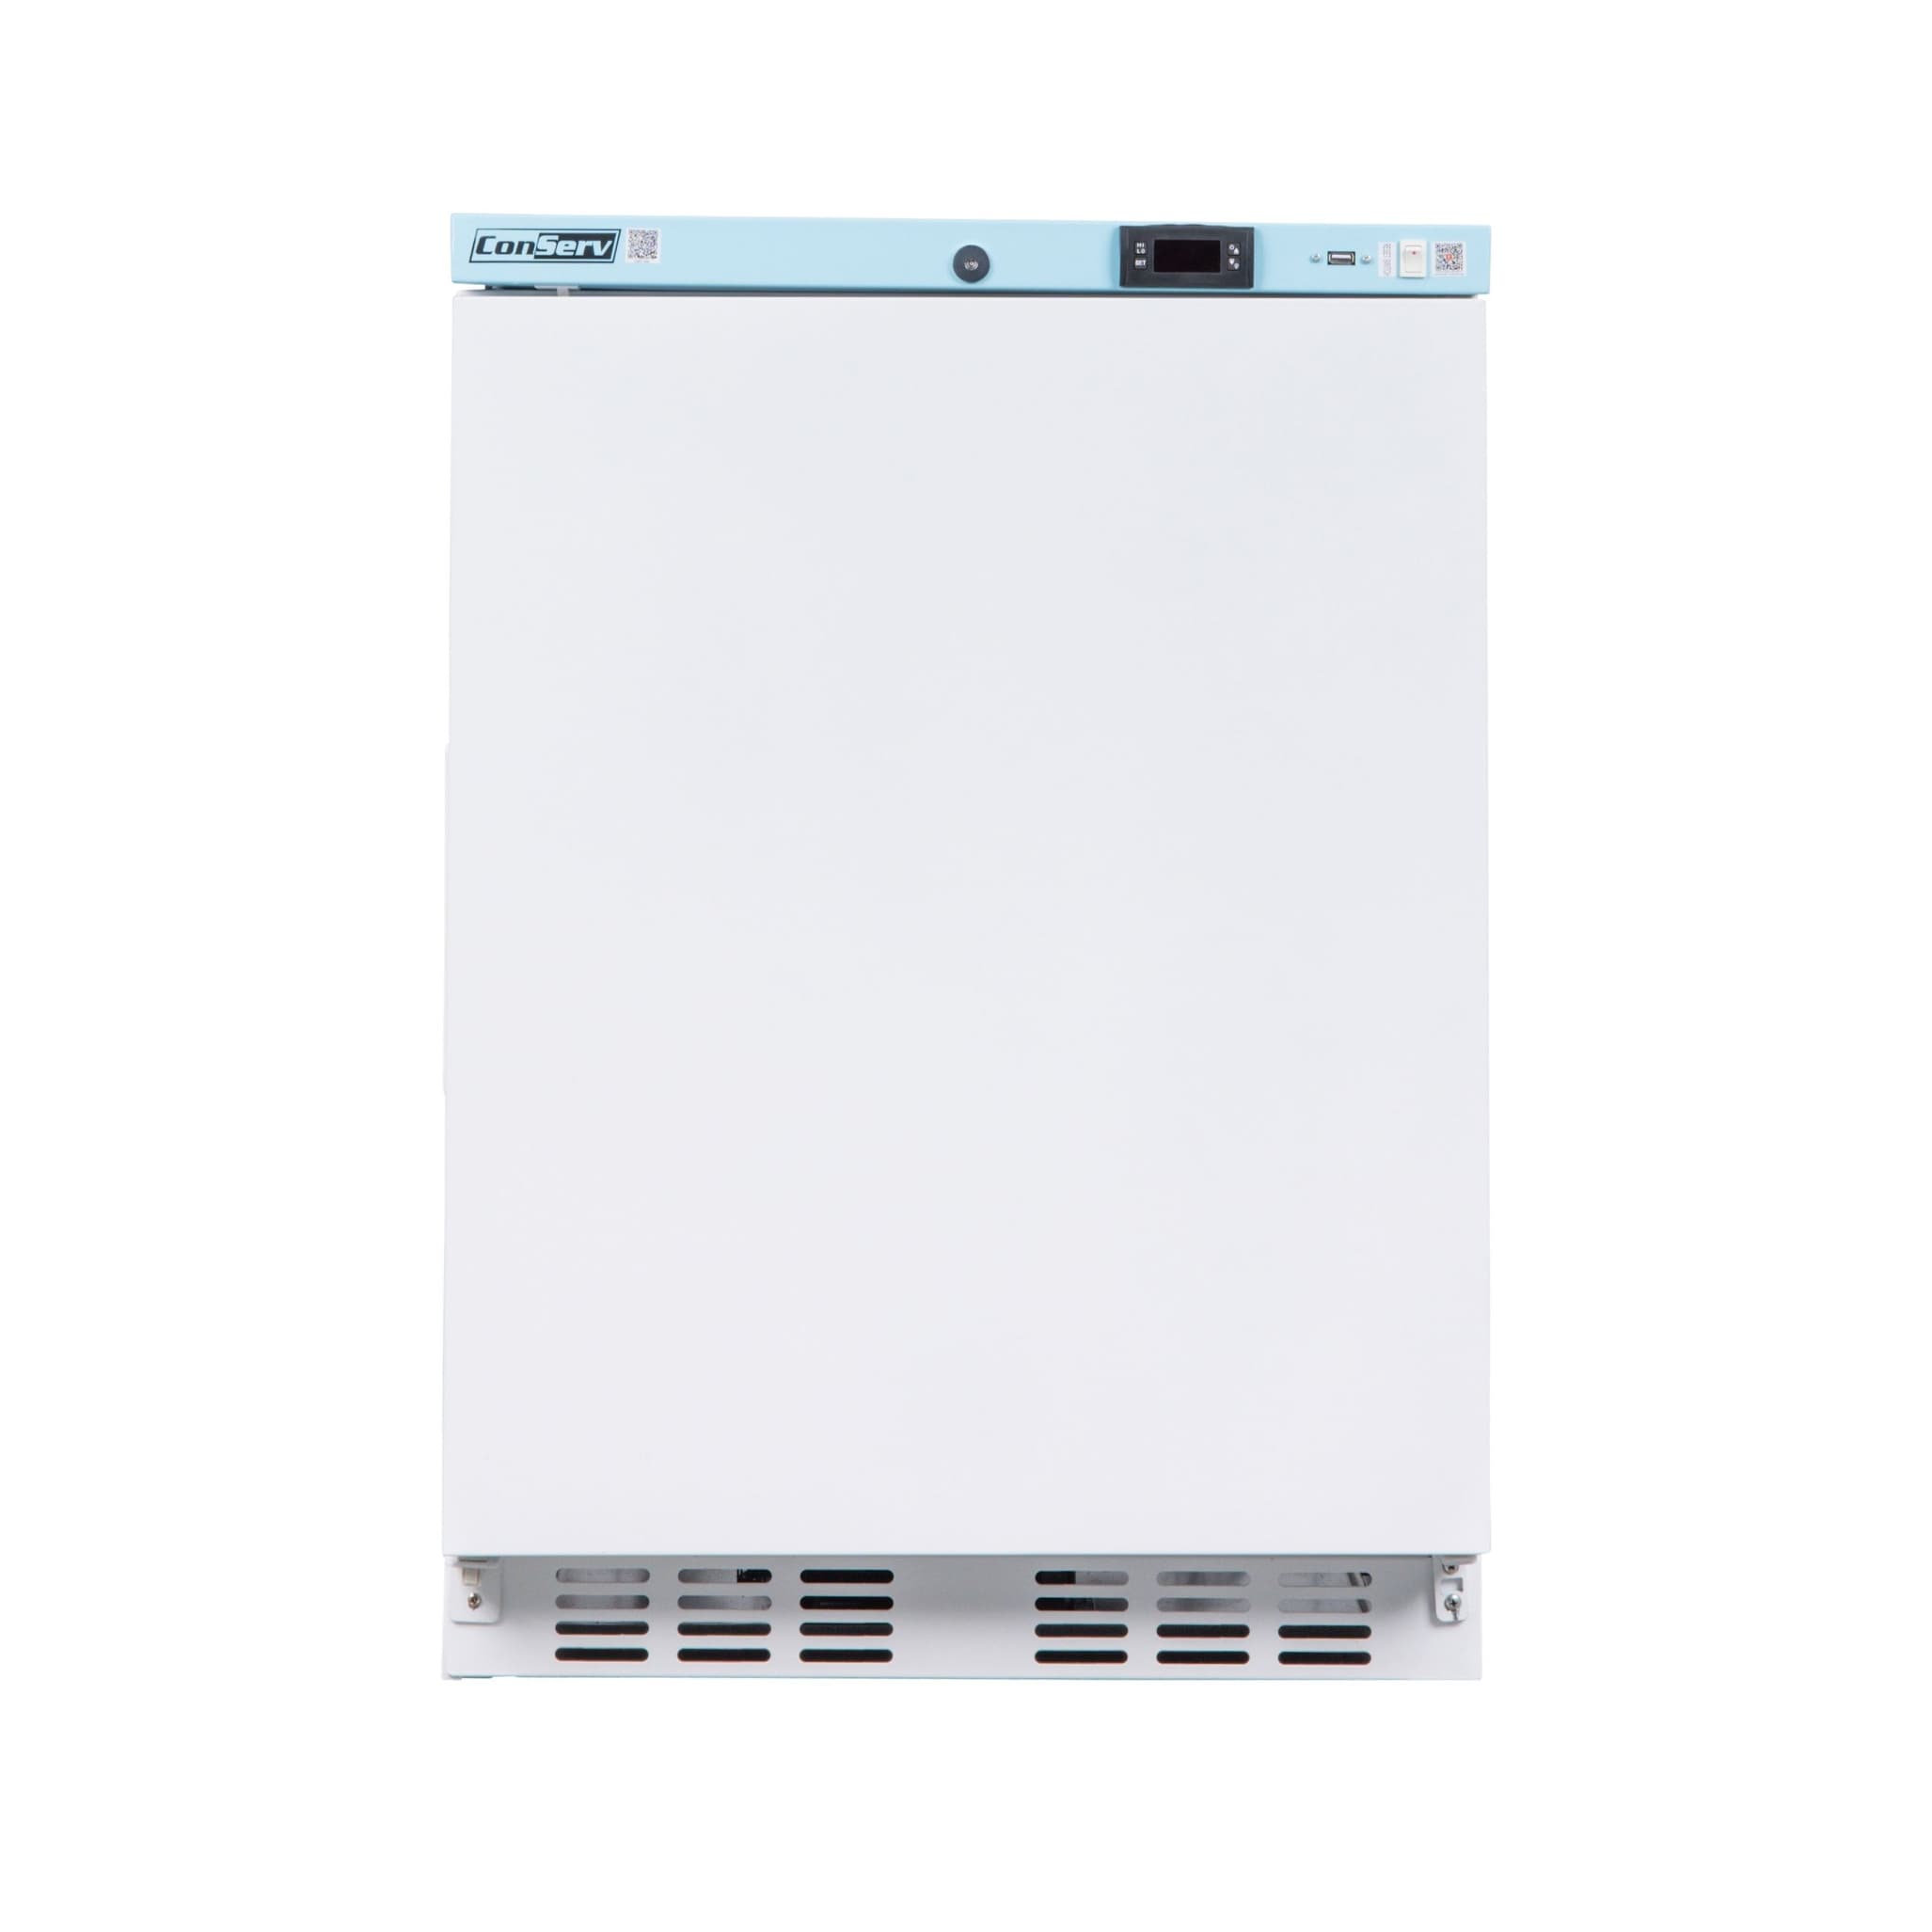 Equator Advance Appliances 3.9 cu.ft. Commercial Refrigerator in White with Temperature Alarm